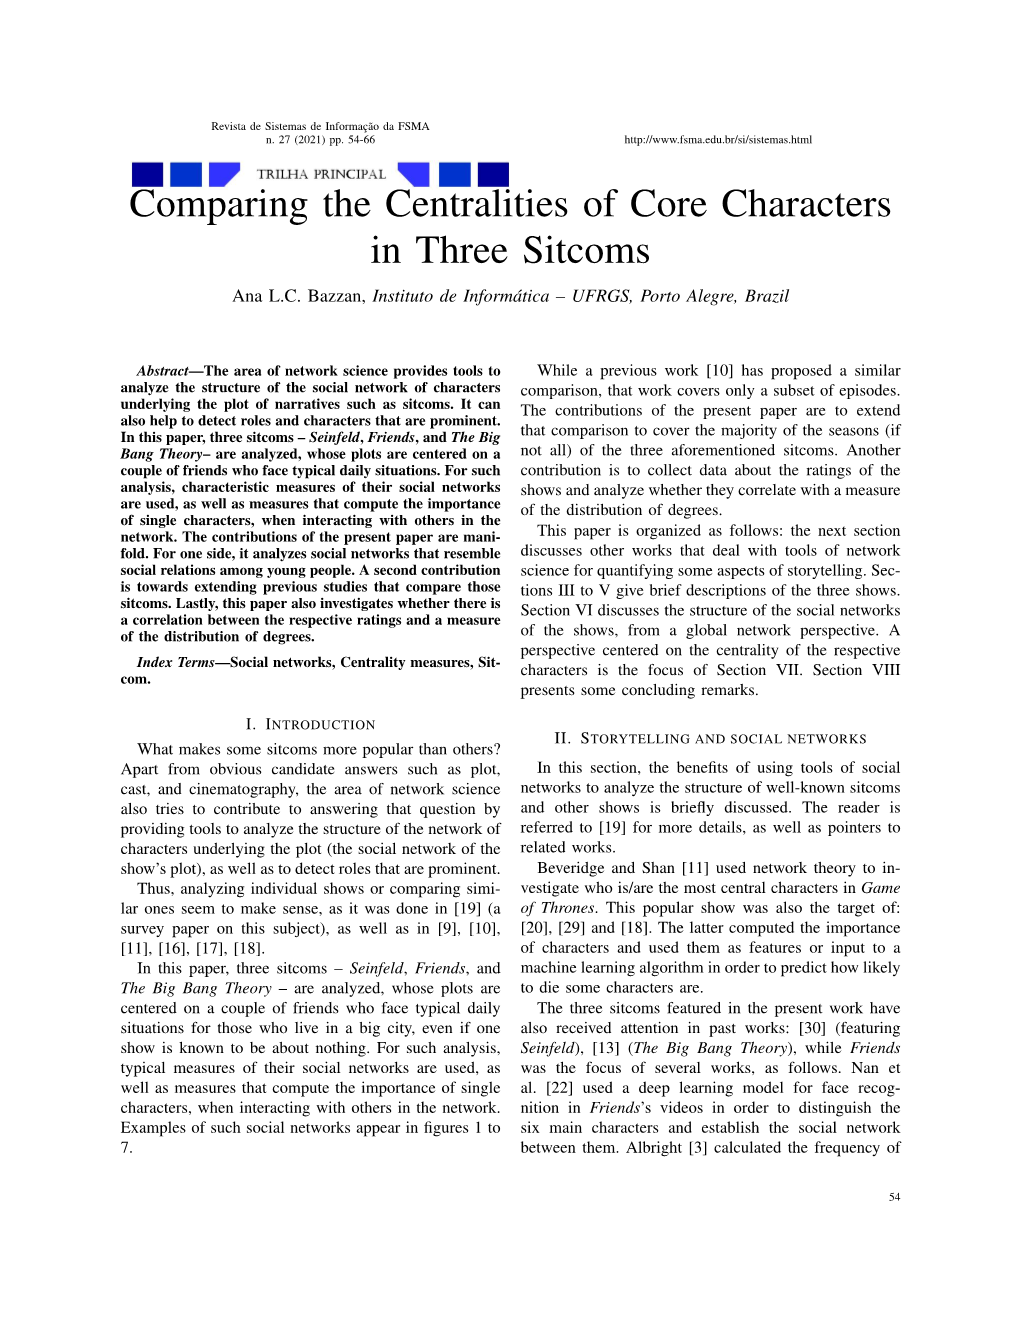 Comparing the Centralities of Core Characters in Three Sitcoms Ana L.C